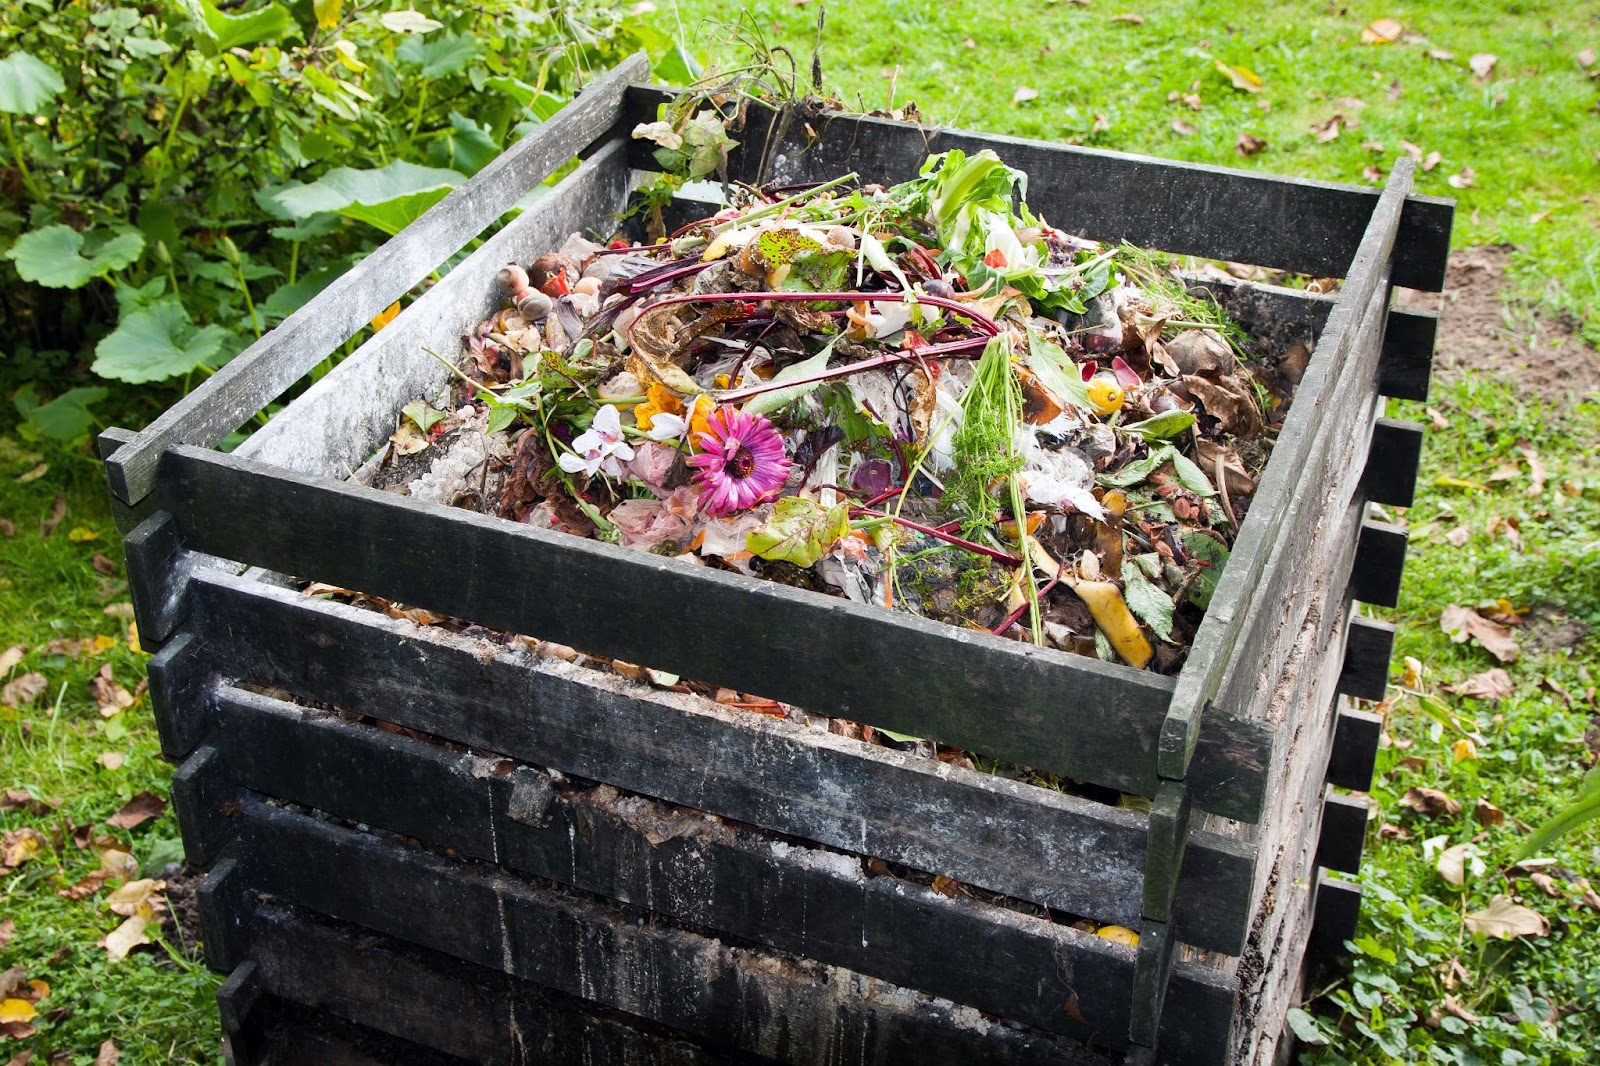 A Square compost heap in a wooden crate